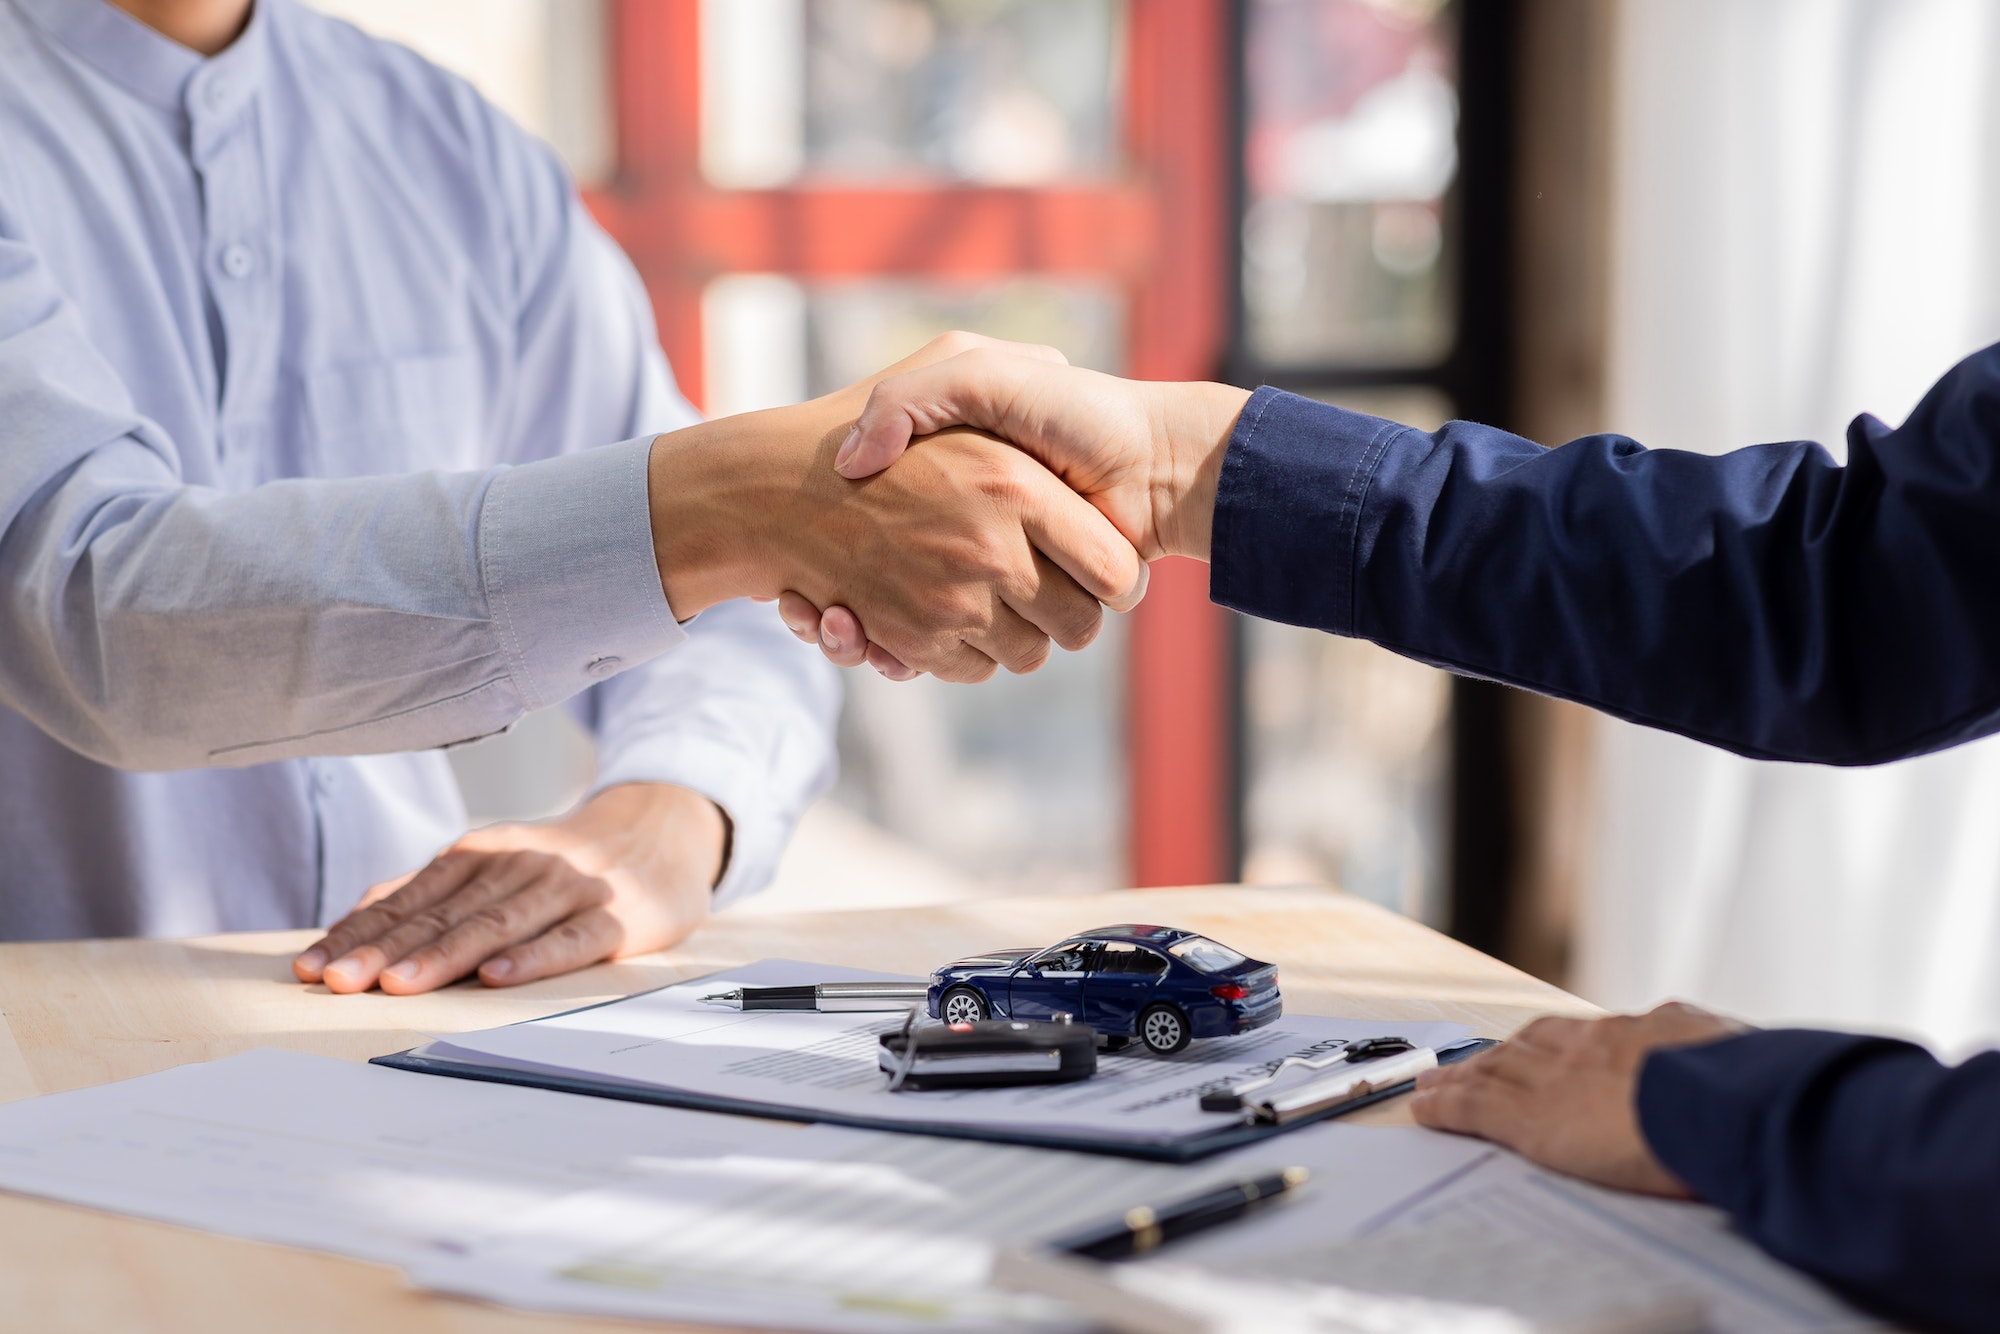 car-rental-service-sales-give-the-car-key-concept-close-up-view-hand-of-agent-handshake-to-the